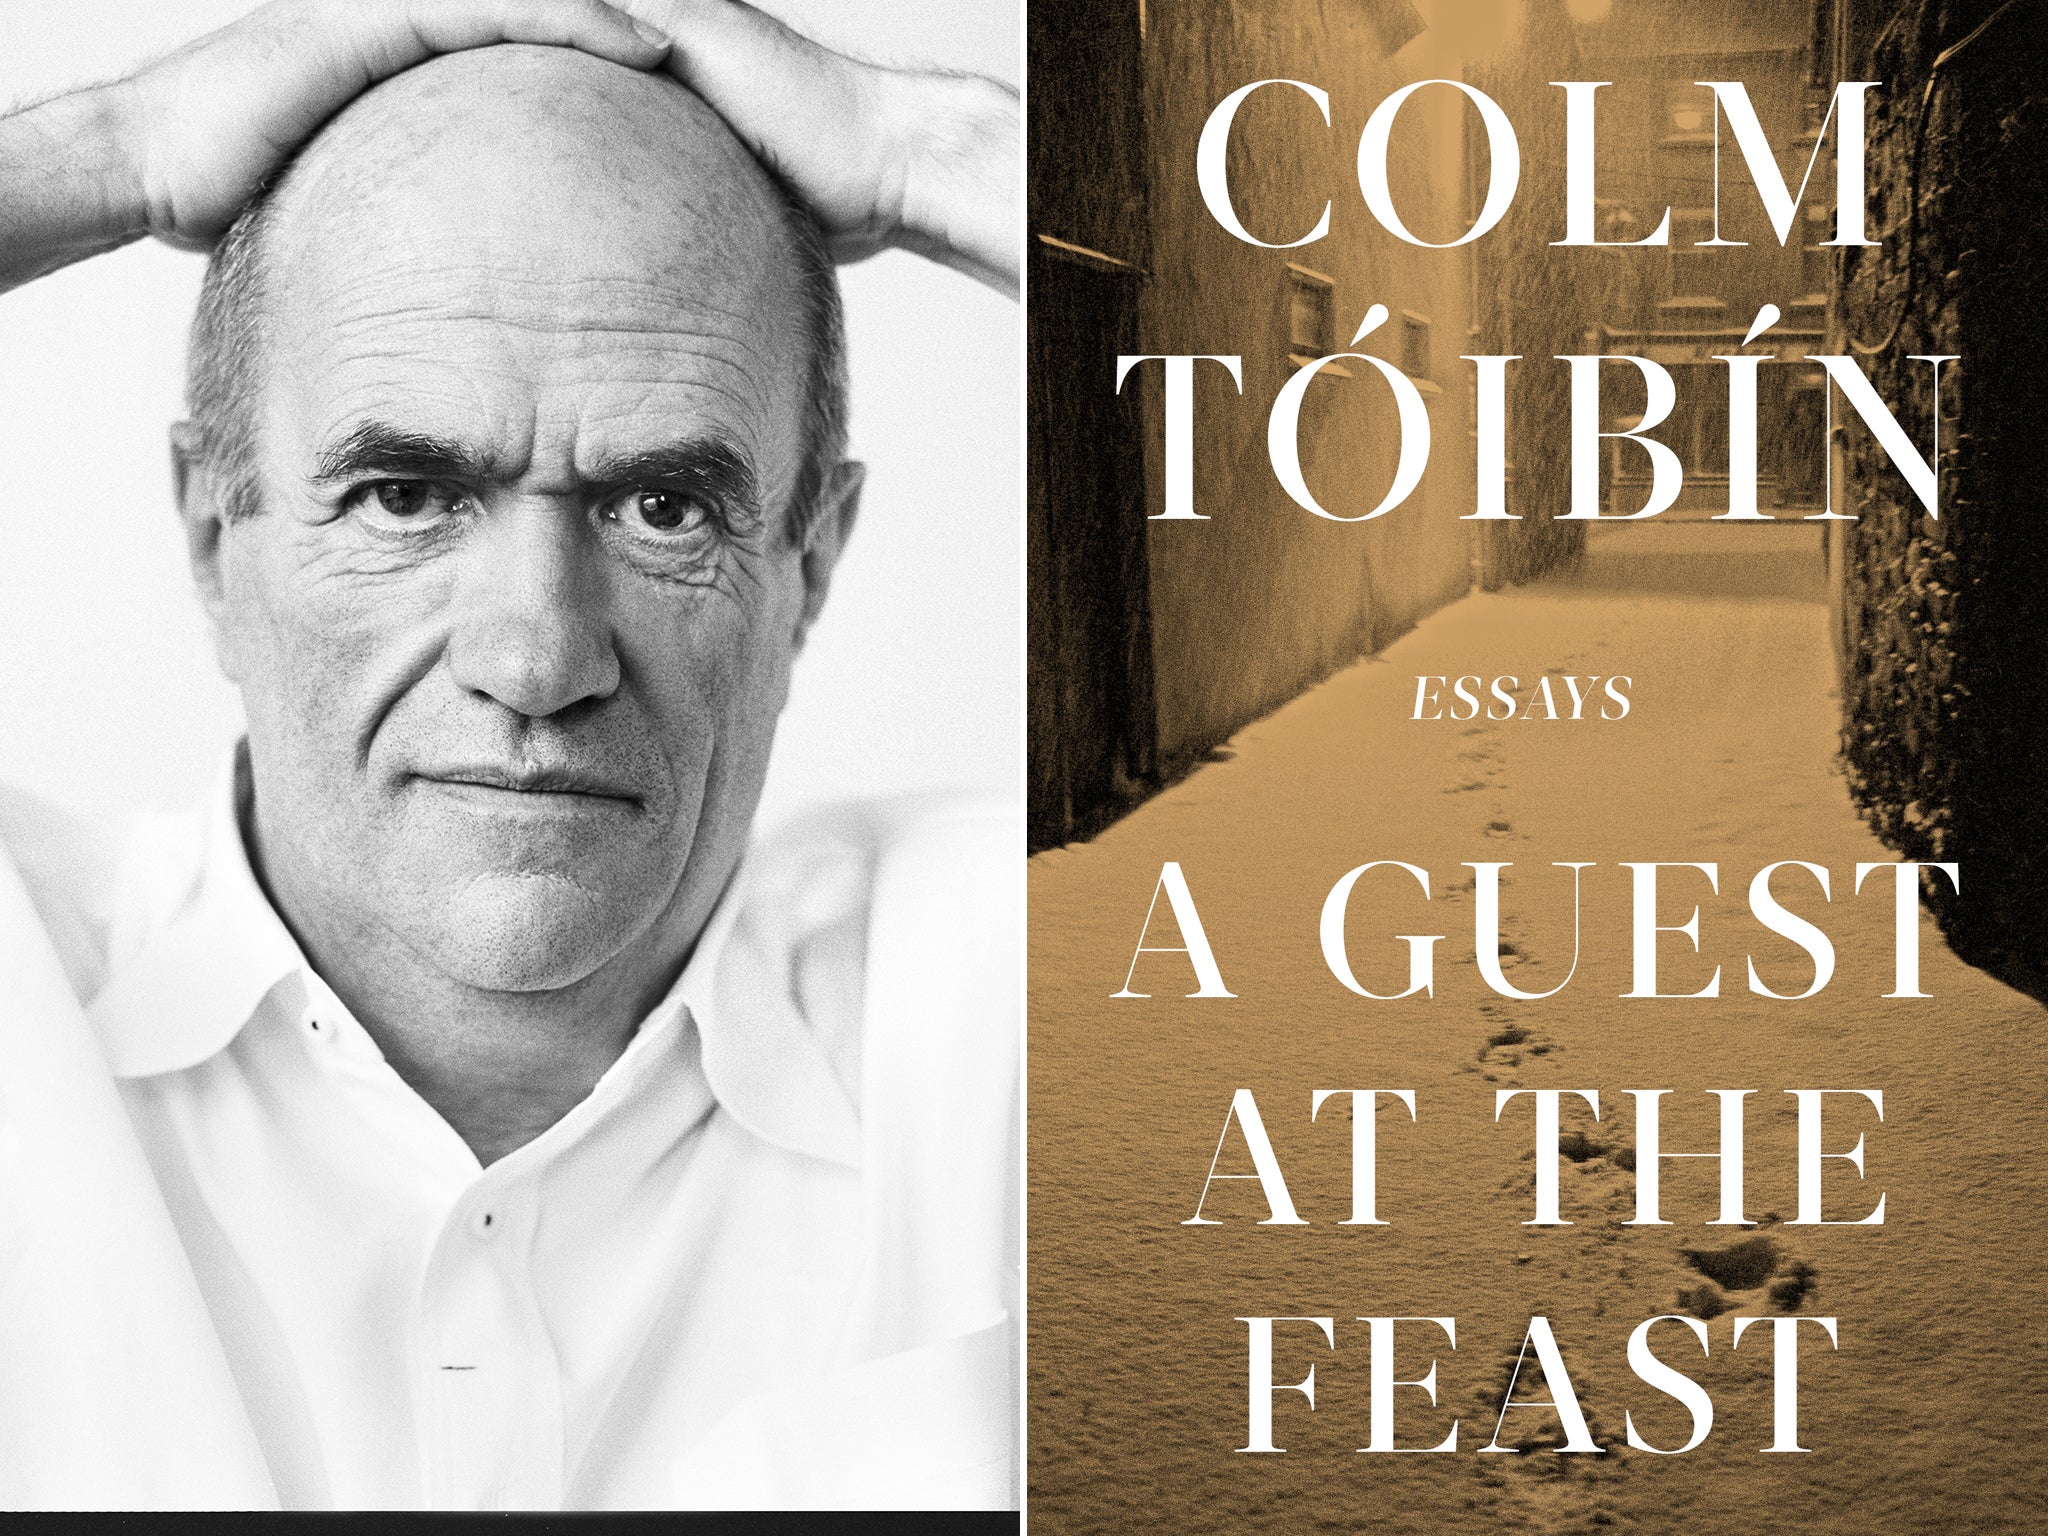 Irish novelist, playwright and poet Colm Tóibín’s ‘A Guest at the Feast’ opens with a powerful 2019 essay on his cancer diagnosis